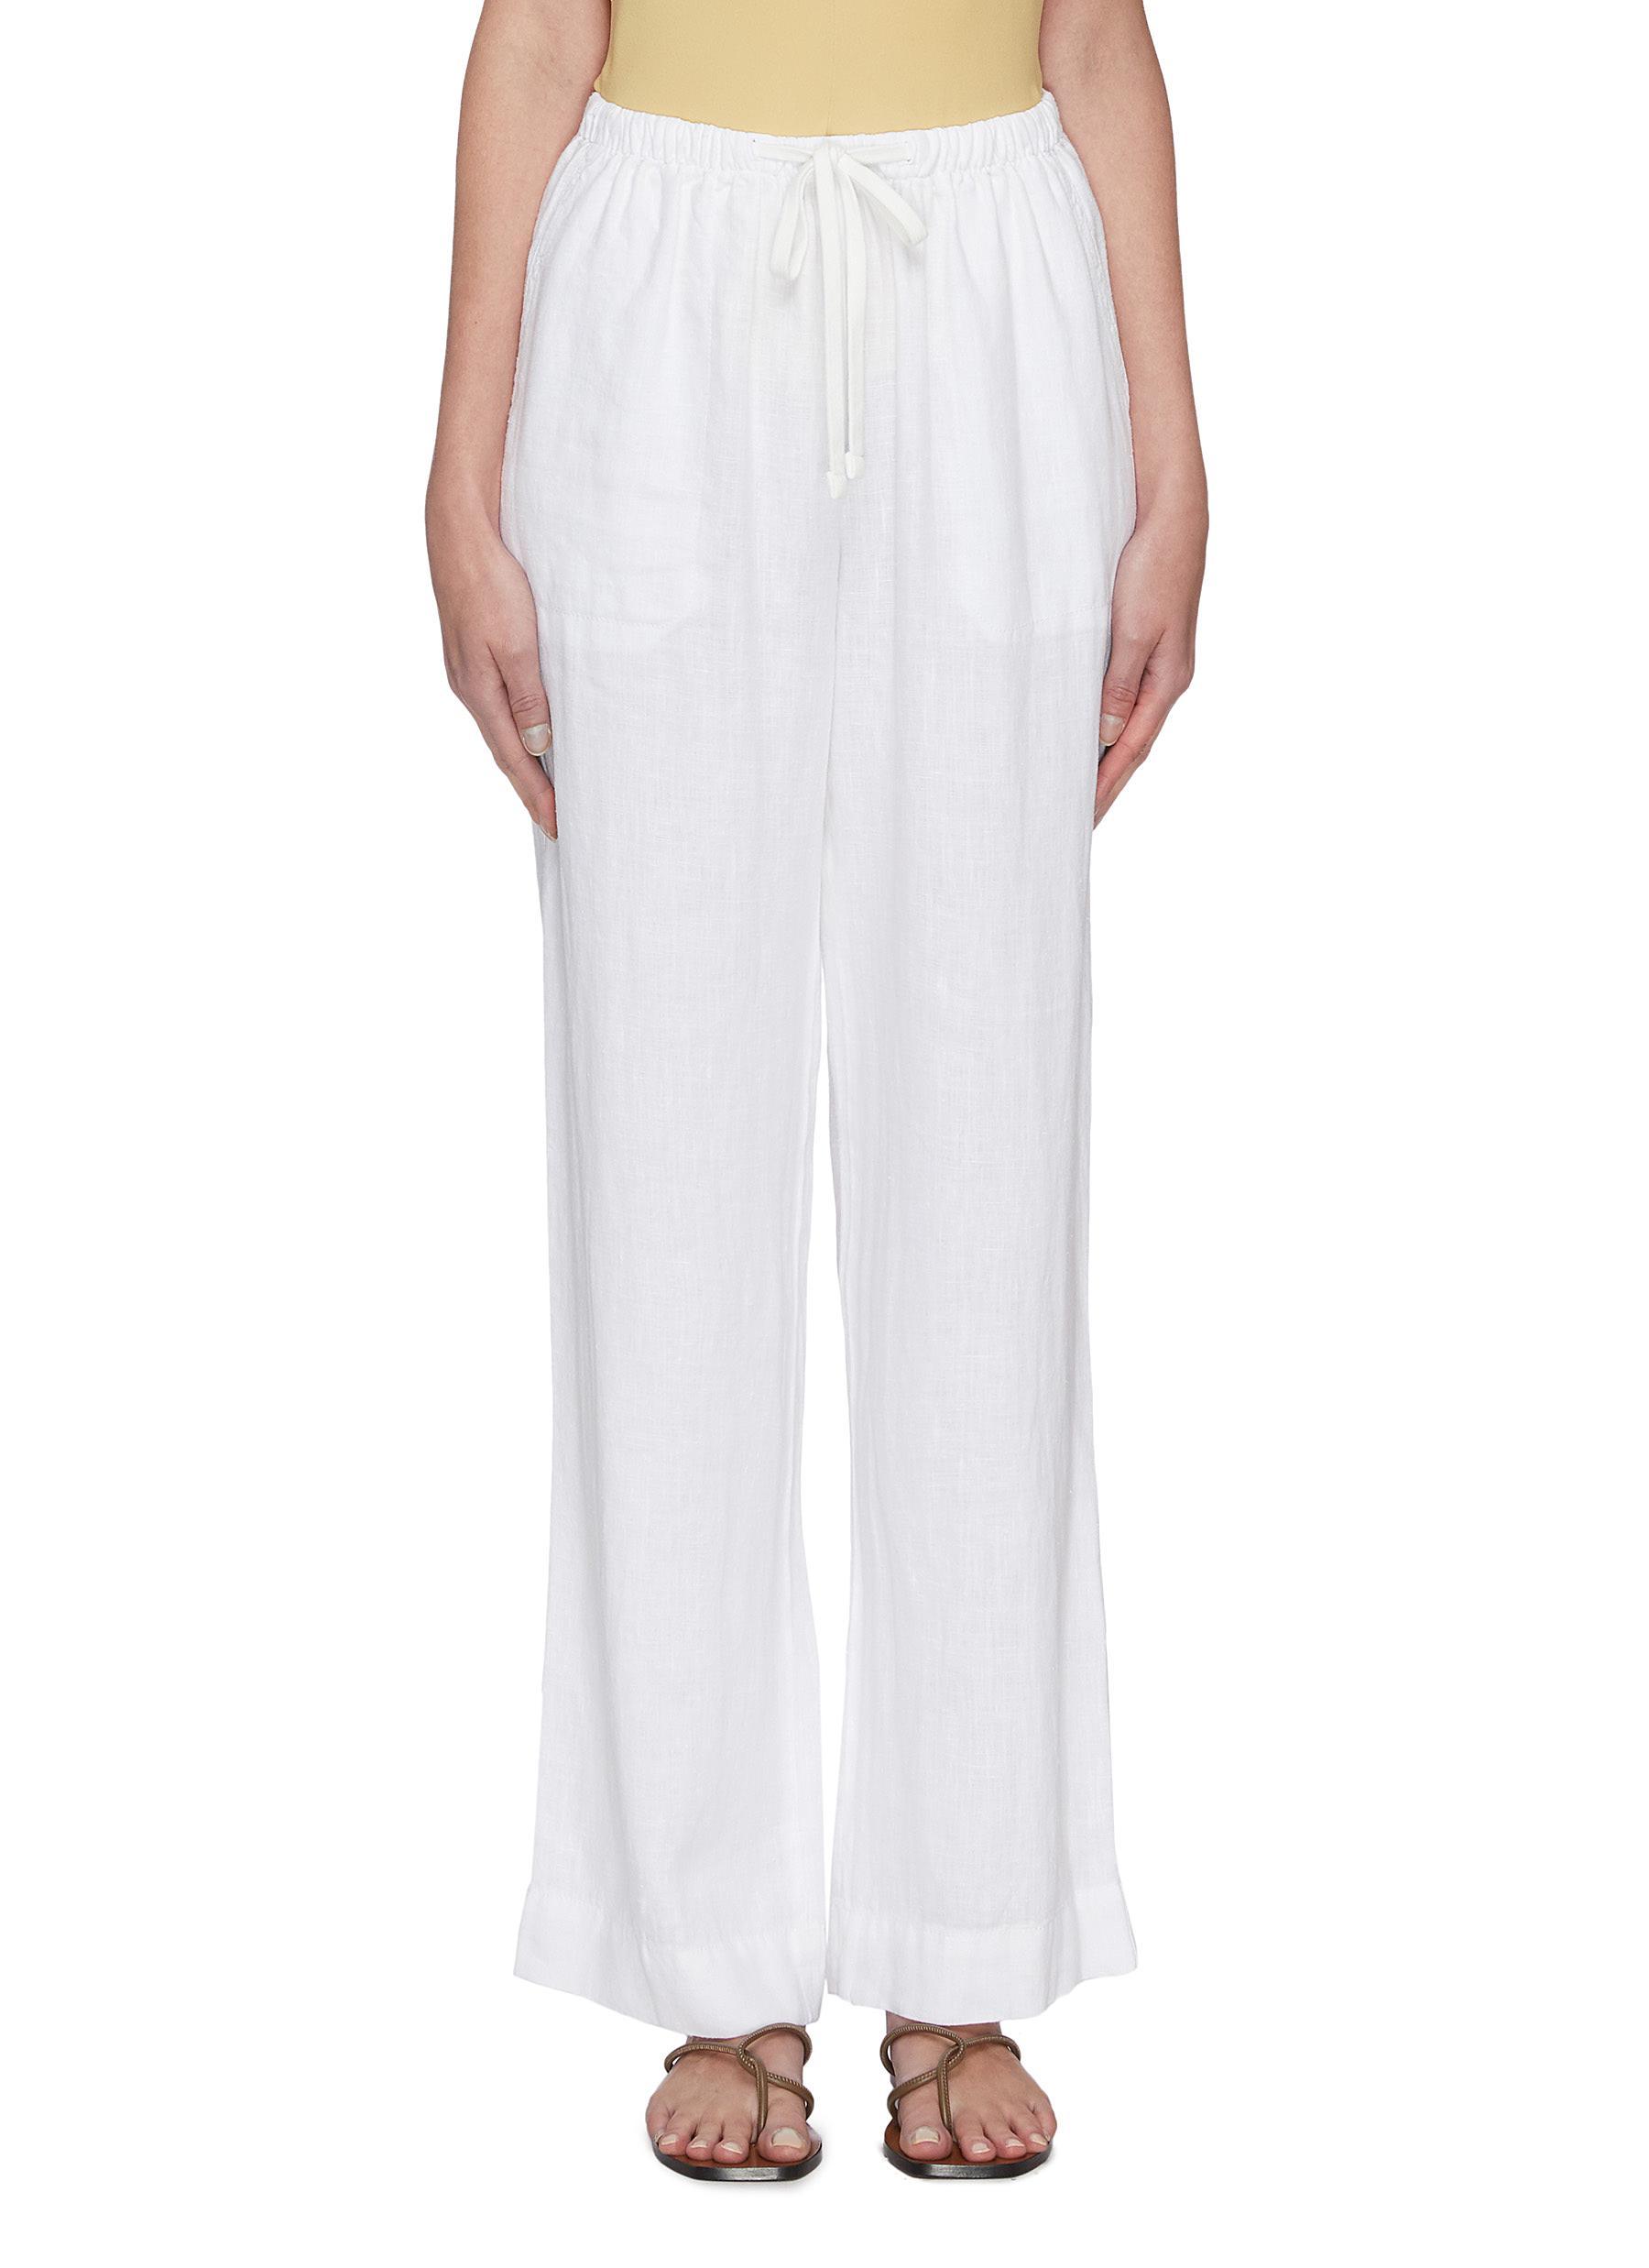 Vince Tie Front Pants in White - Lyst